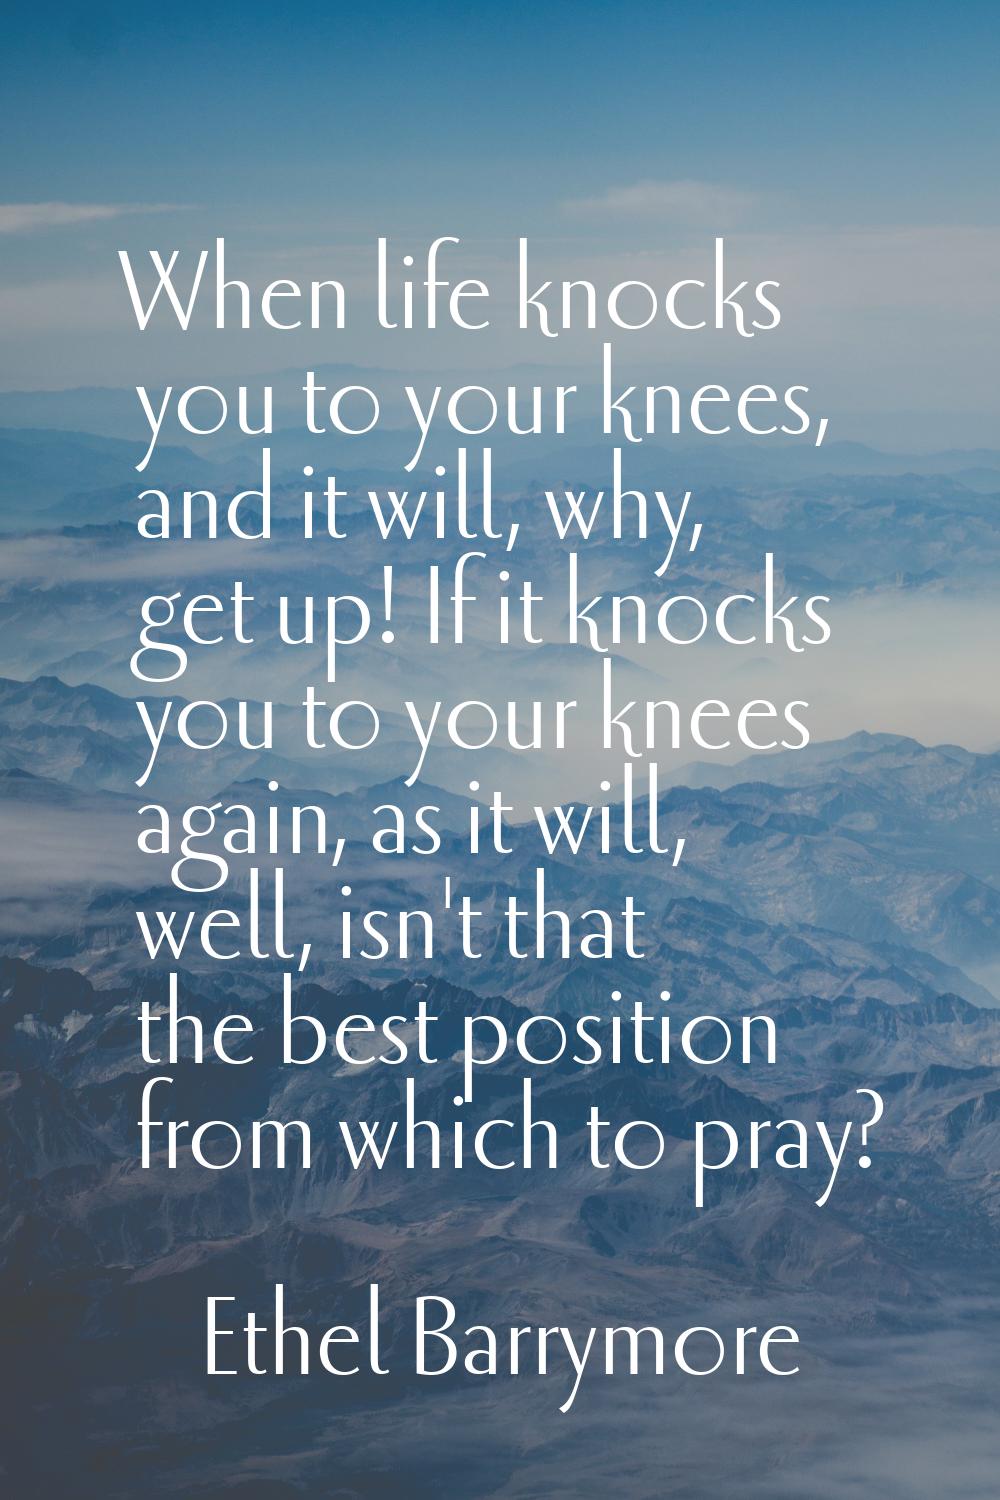 When life knocks you to your knees, and it will, why, get up! If it knocks you to your knees again,